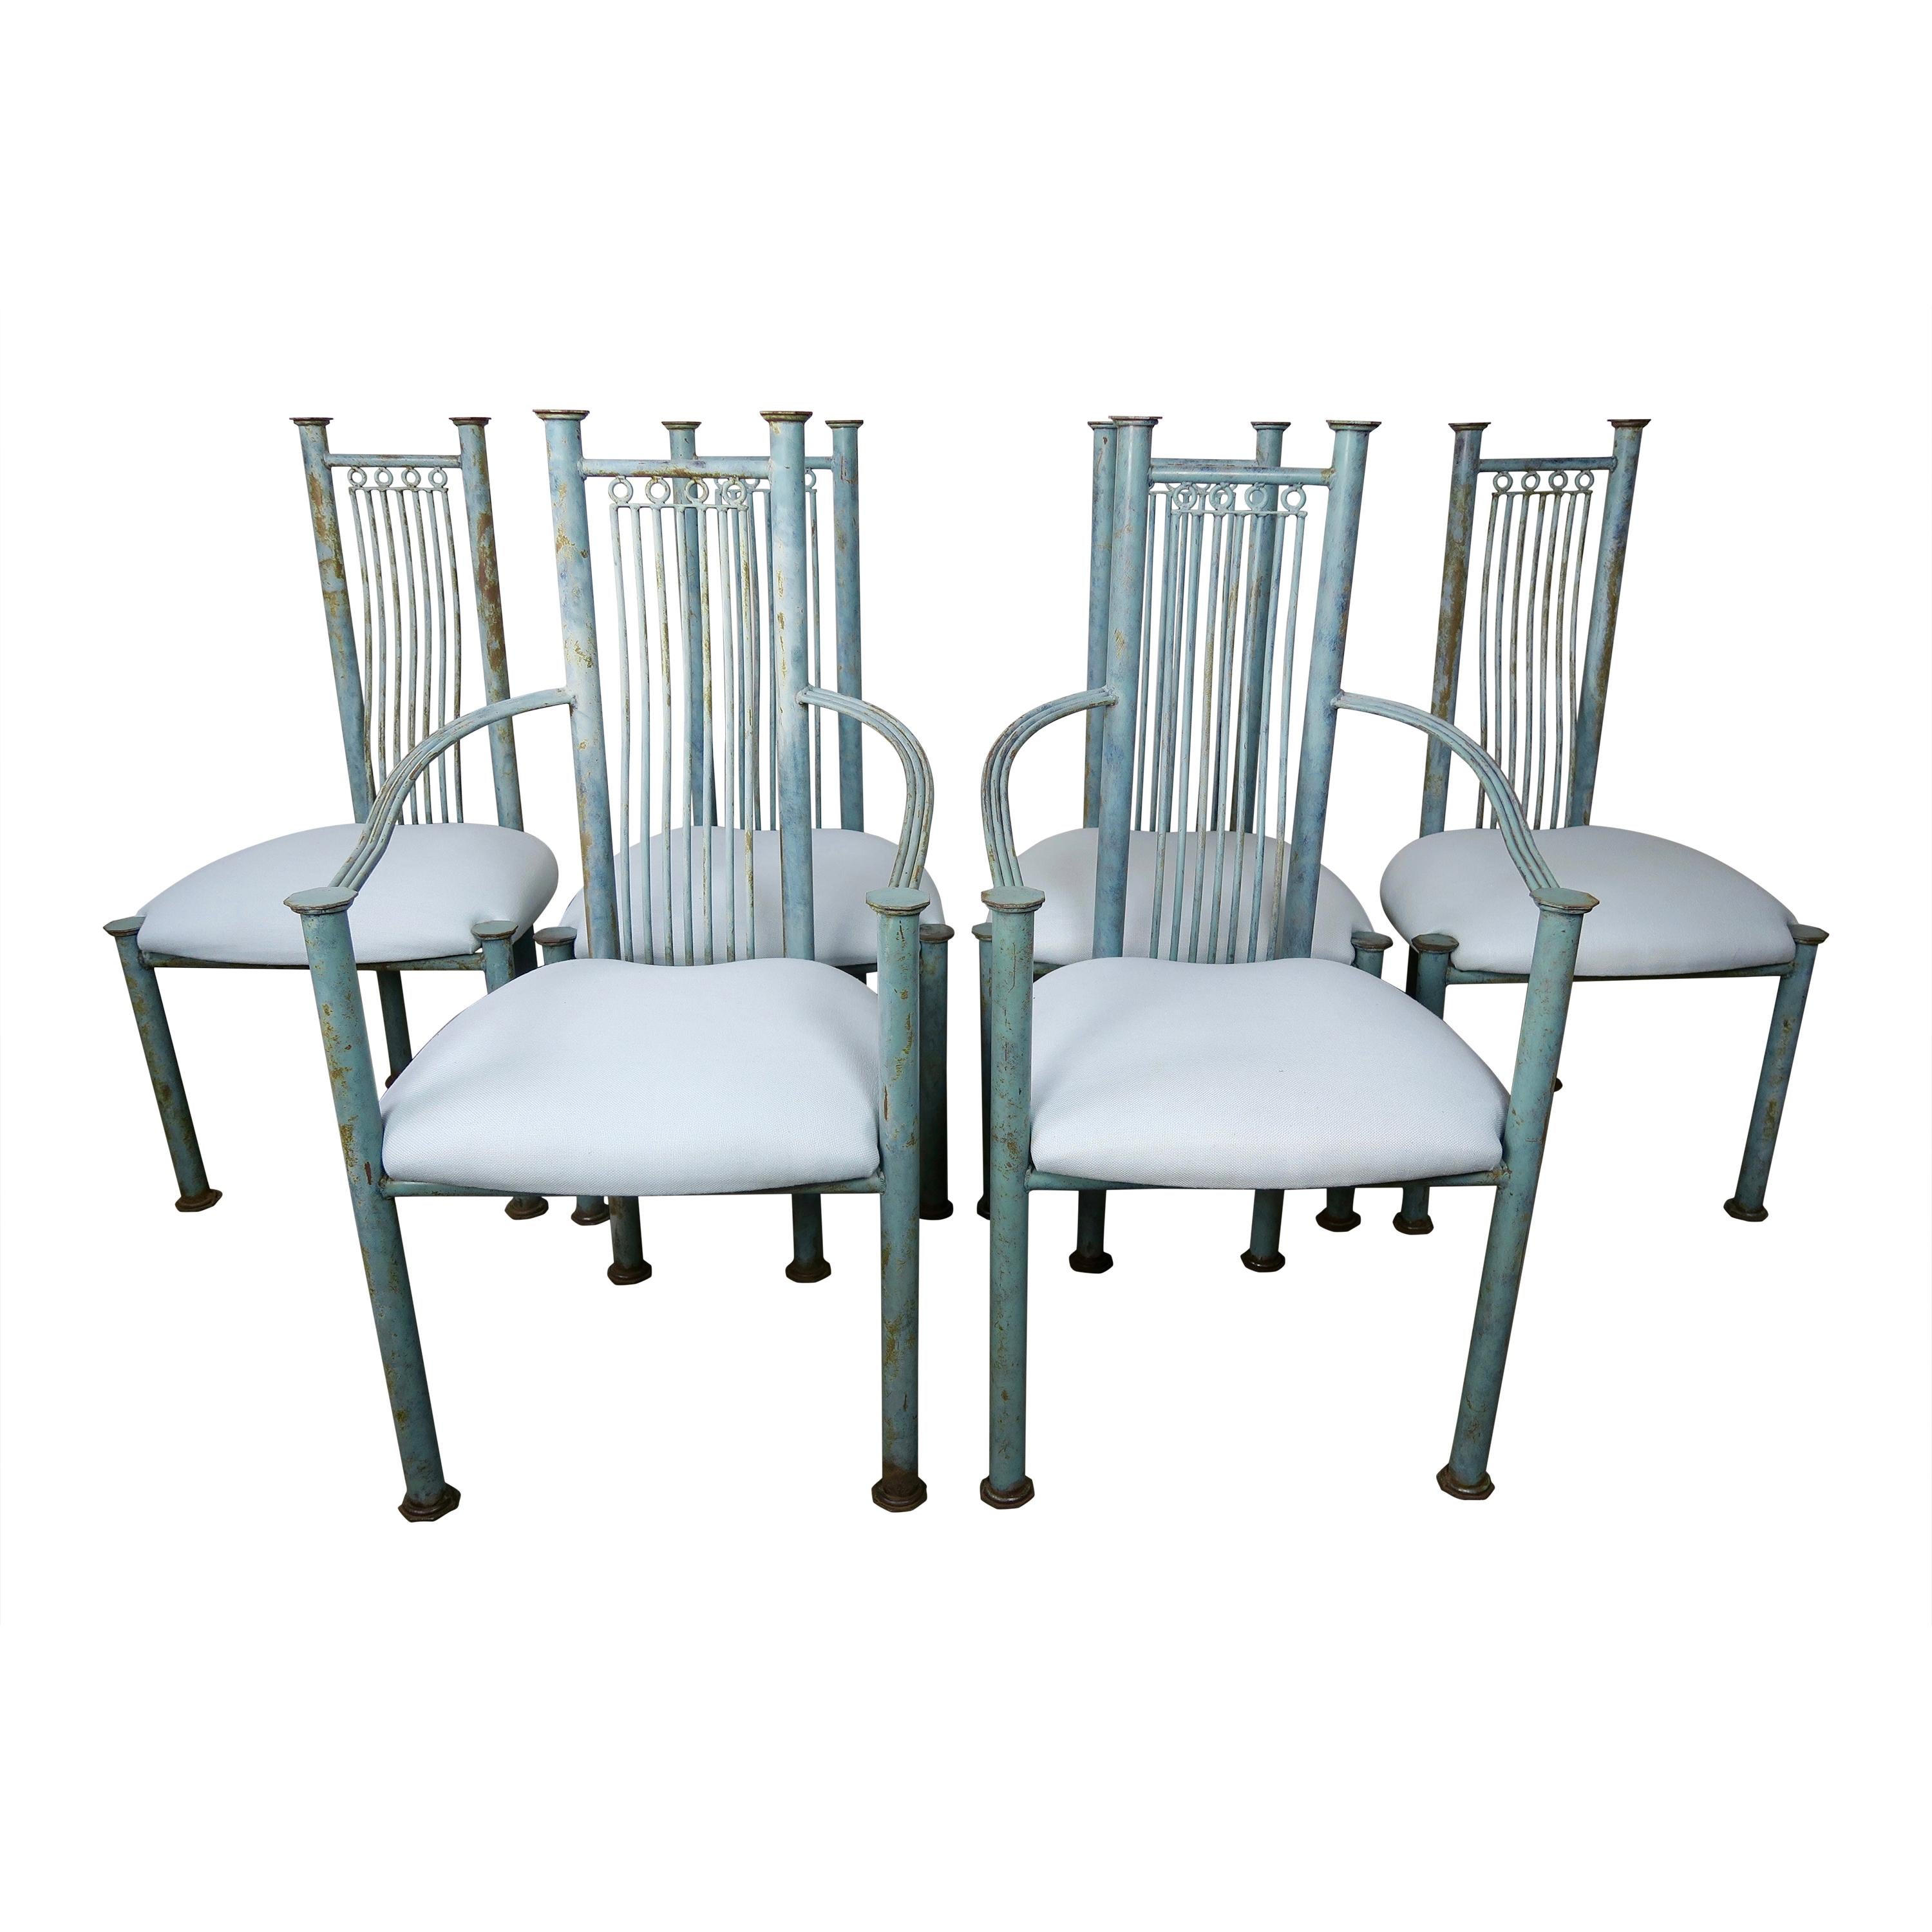 Set of Six Painted Iron Dining Chairs with Linen Seats